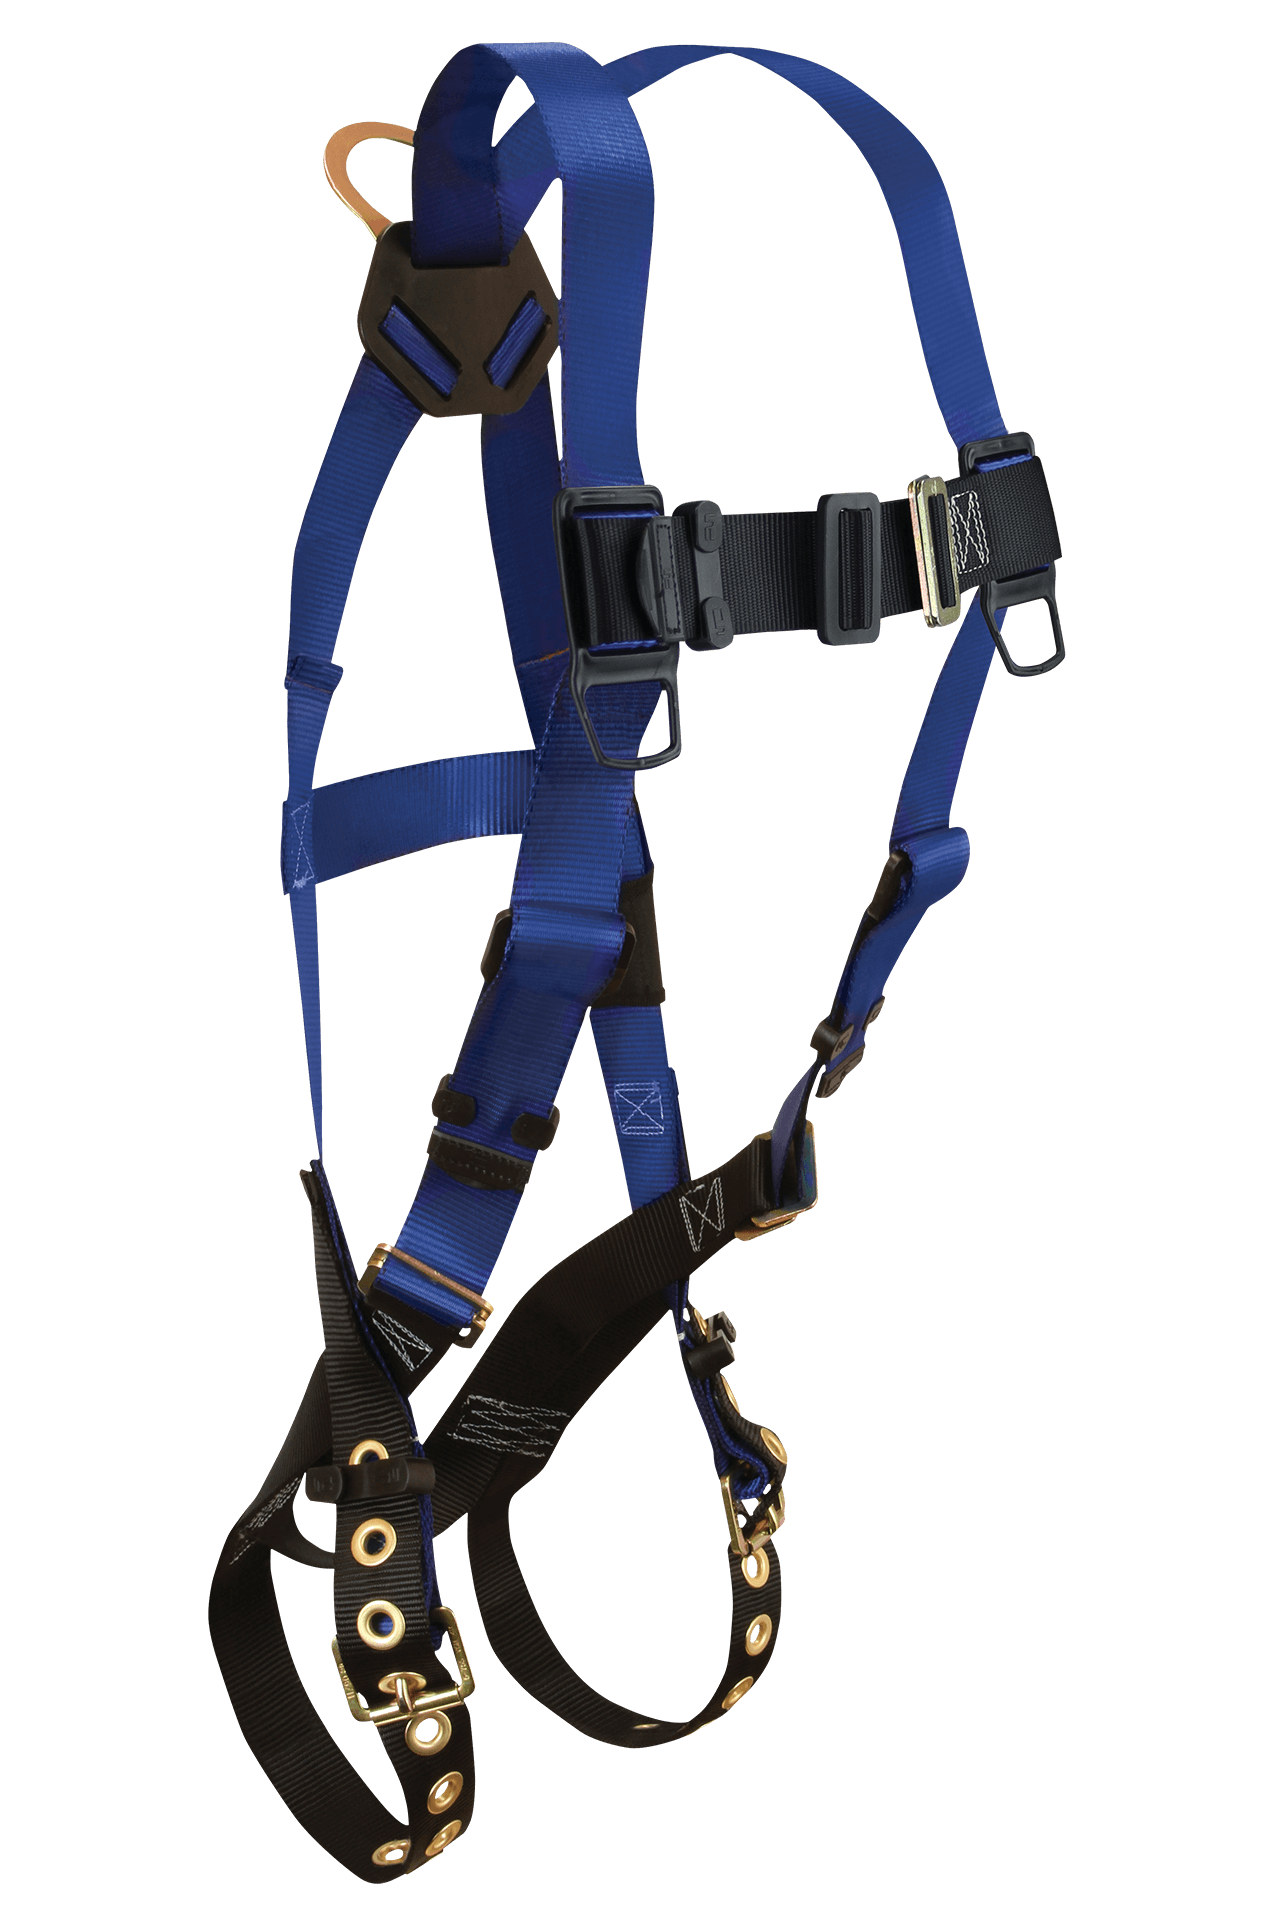 FallTech Contractor 1D Standard Non-Belted Harness Tongue and Buckle Leg